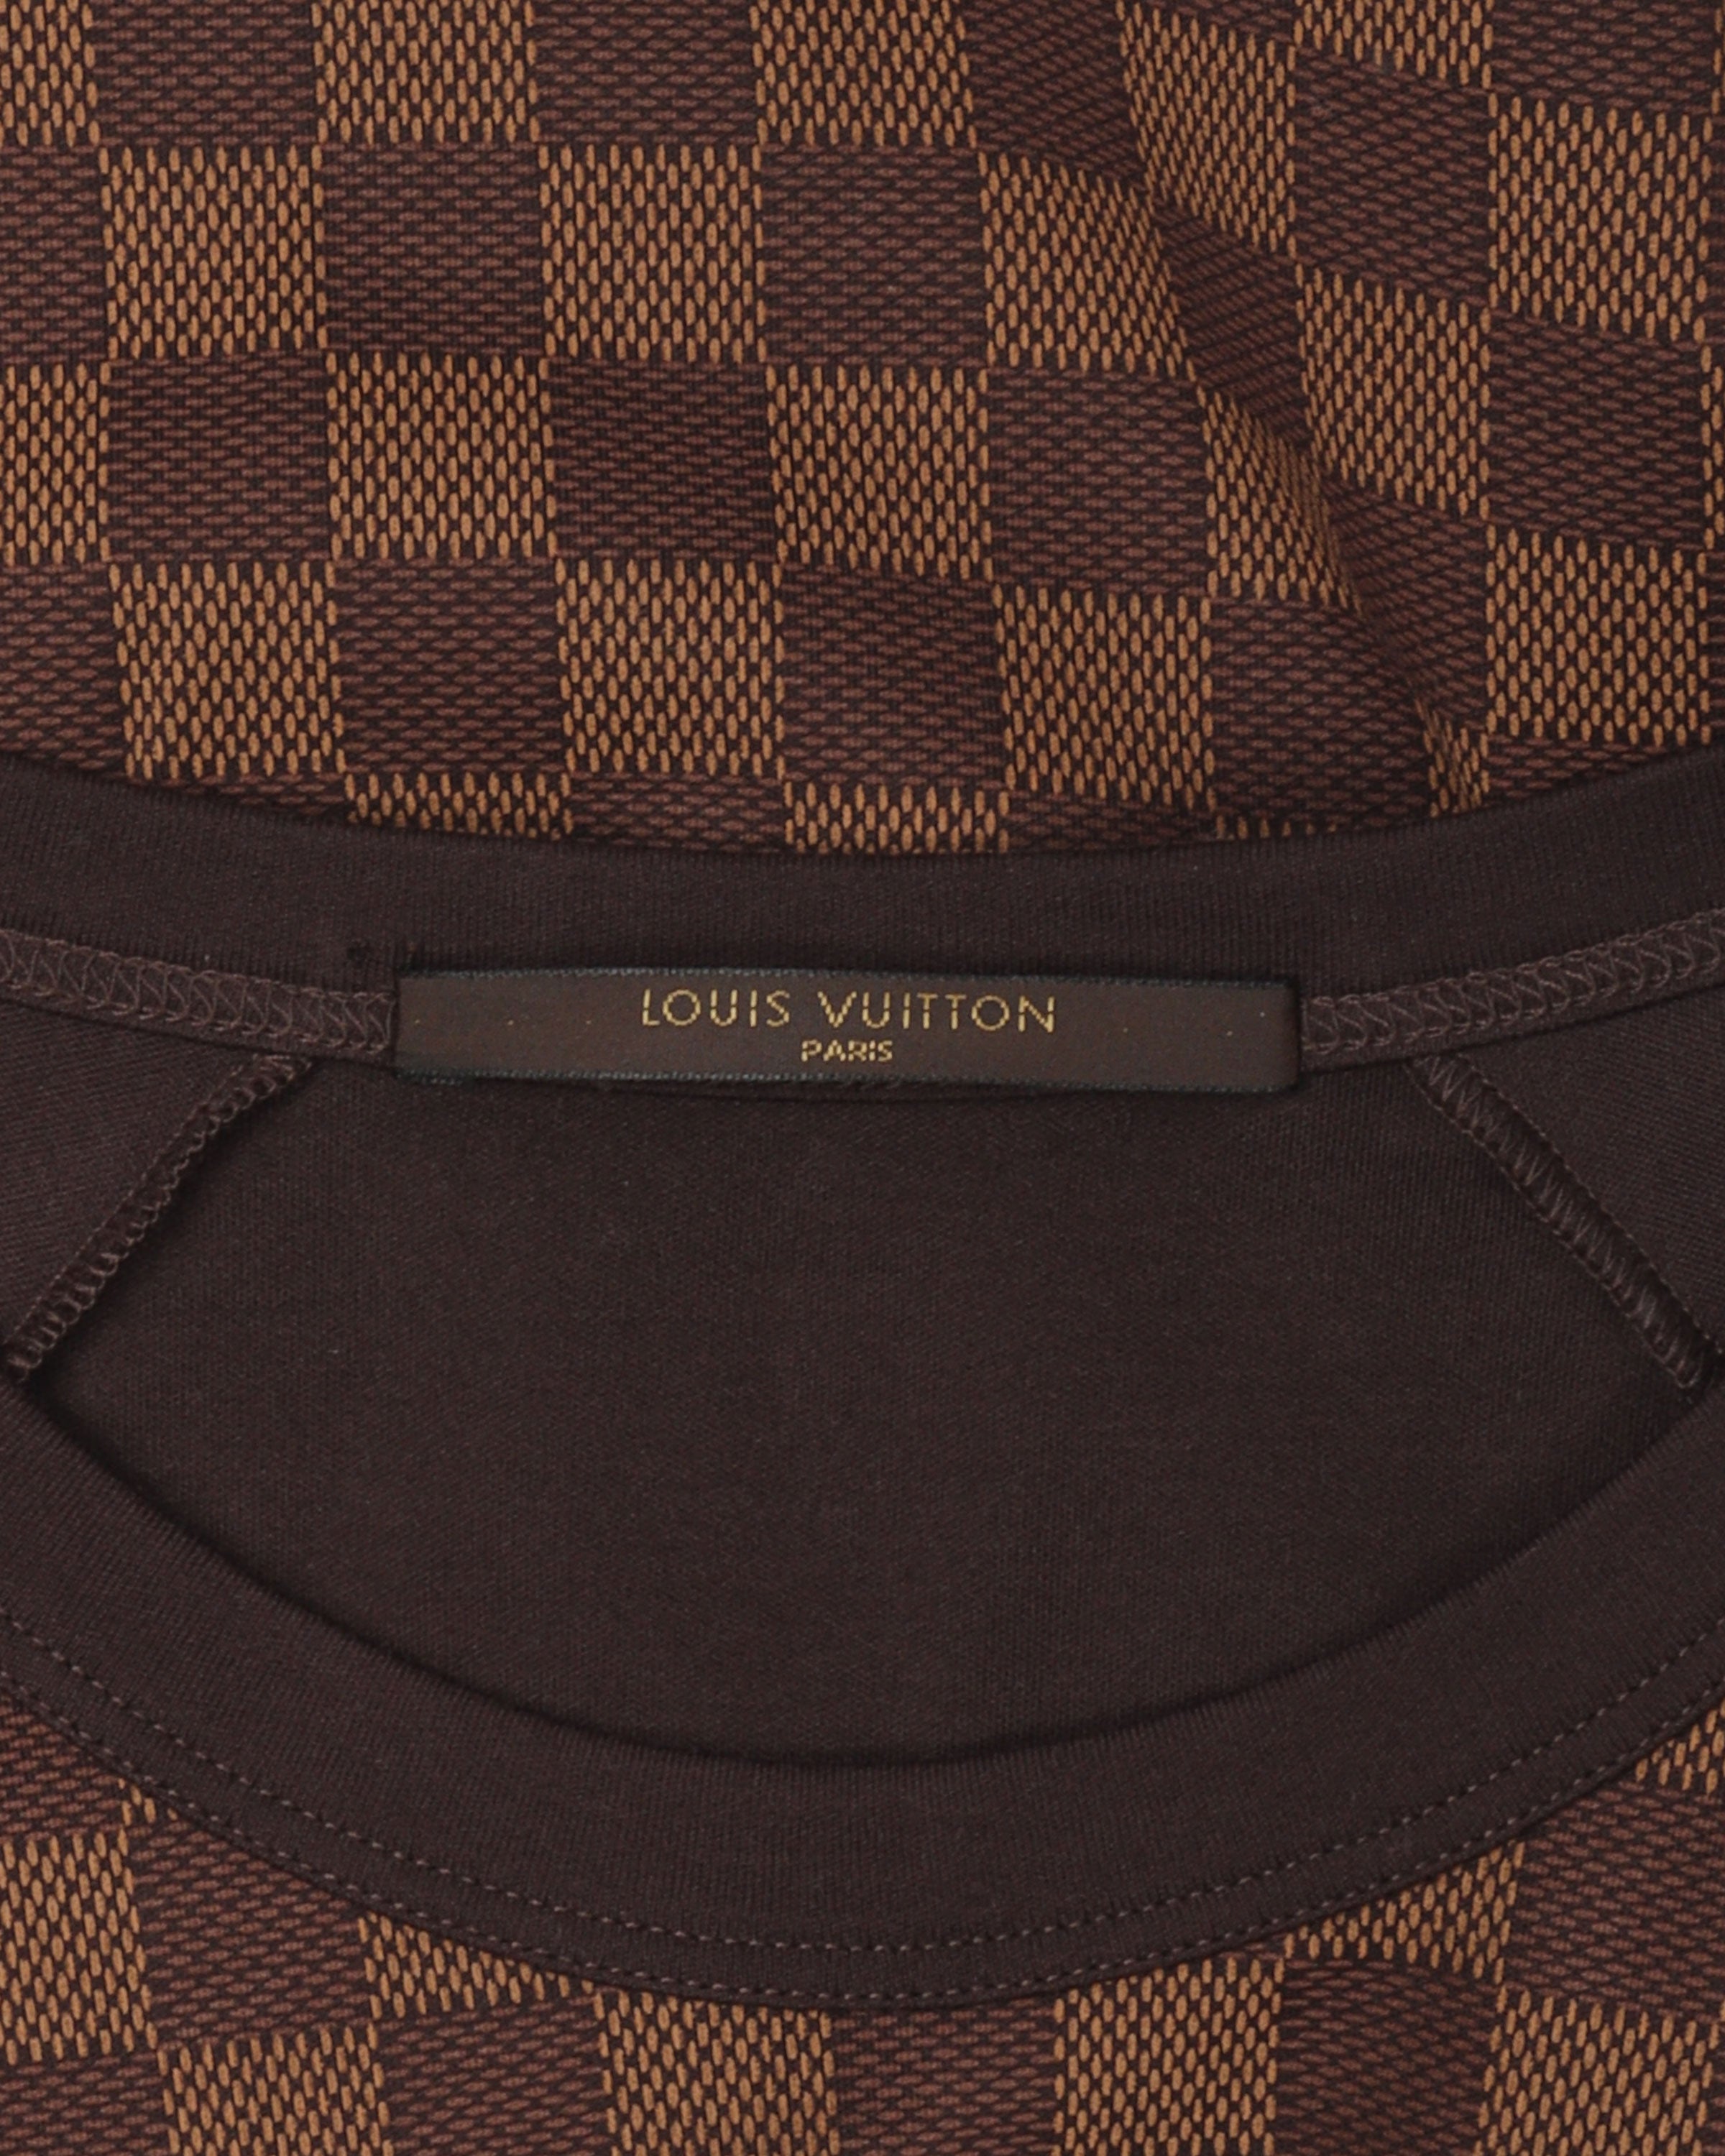 Louis Vuitton DAMIER T-Shirt Size Large With Box SOLD OUT